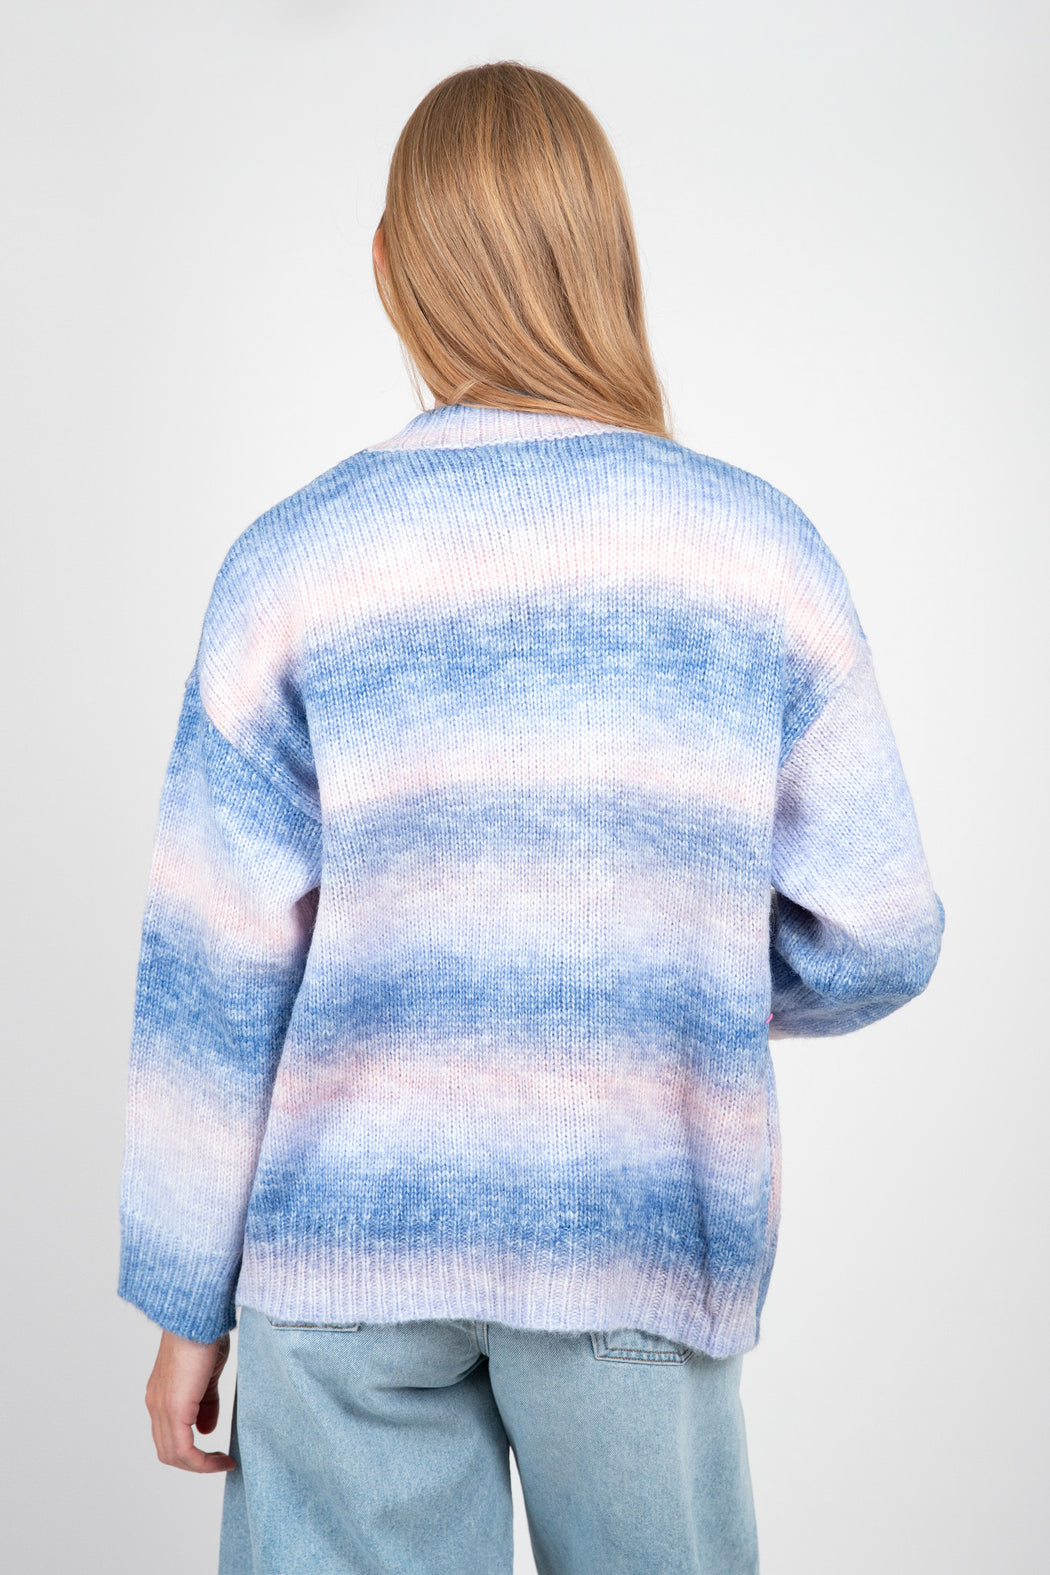 Lyla-Luxe-Betsy-Ombre-Cardigan-Blue-Pink